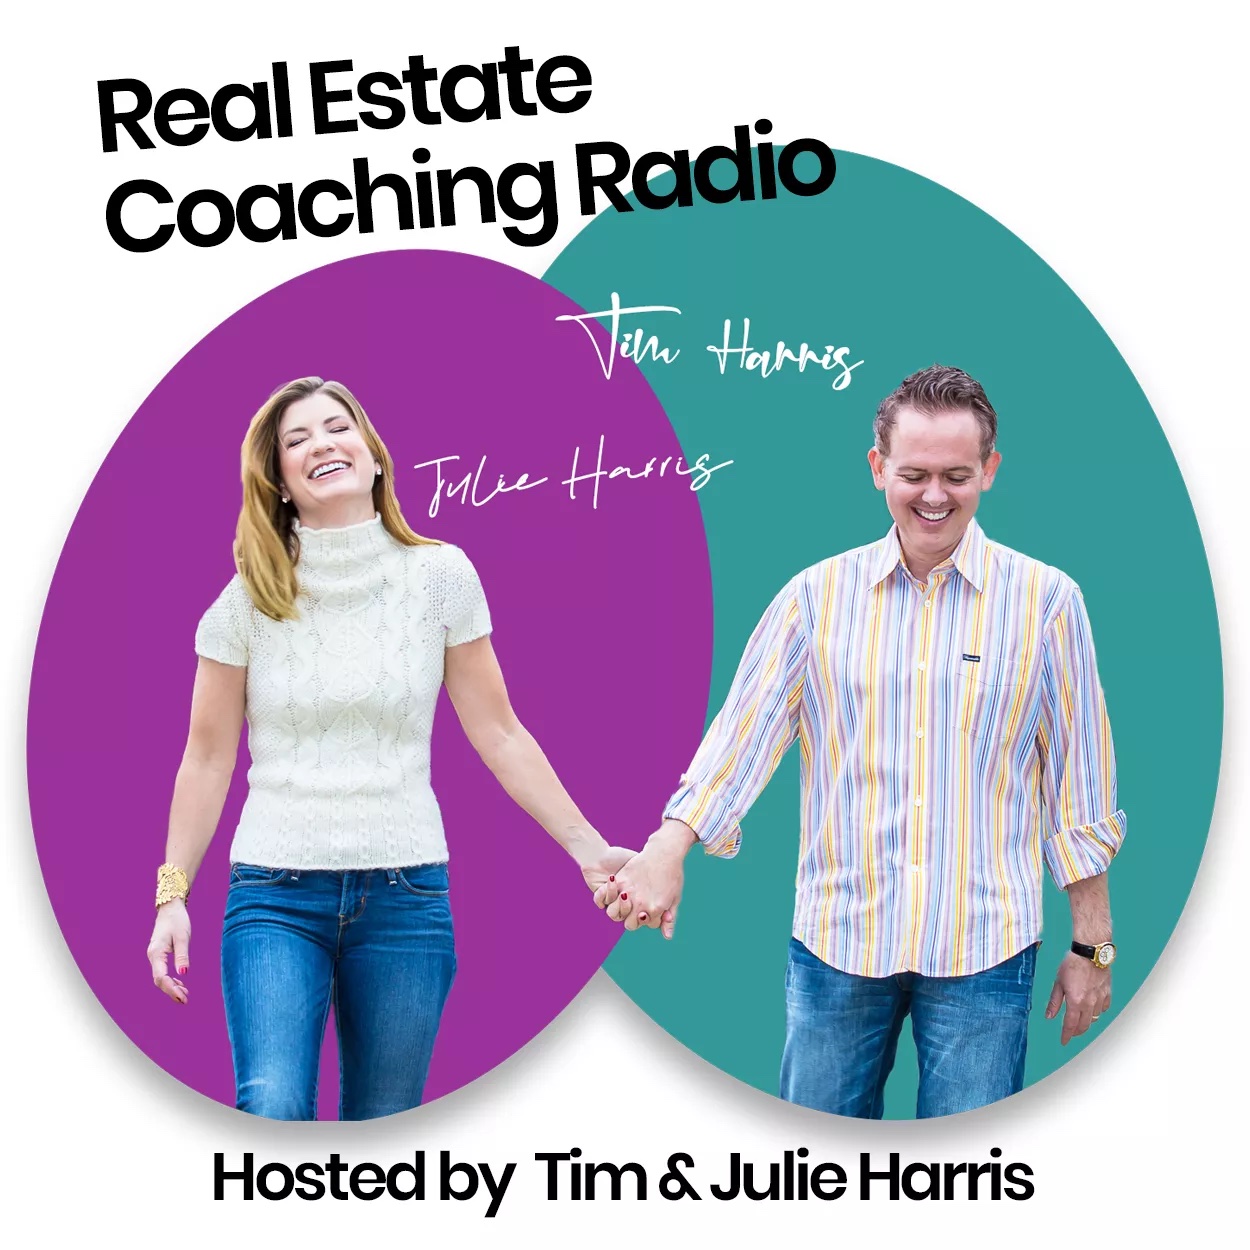 Fresh update on "12 minute" discussed on Real Estate Coaching Radio